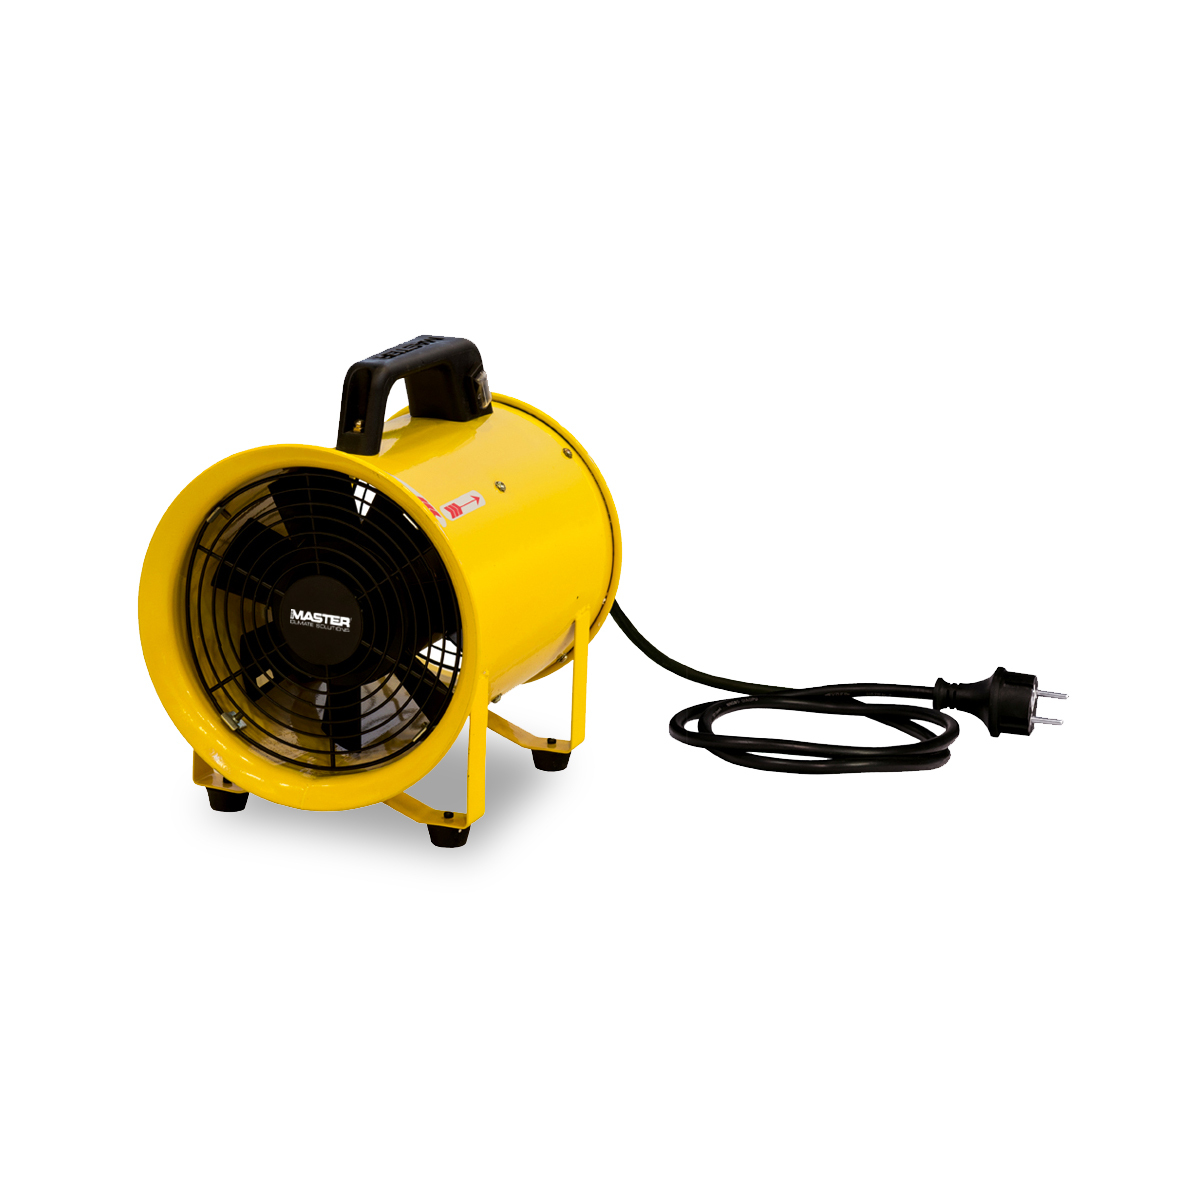 Master BLM 6800 – professional blowers